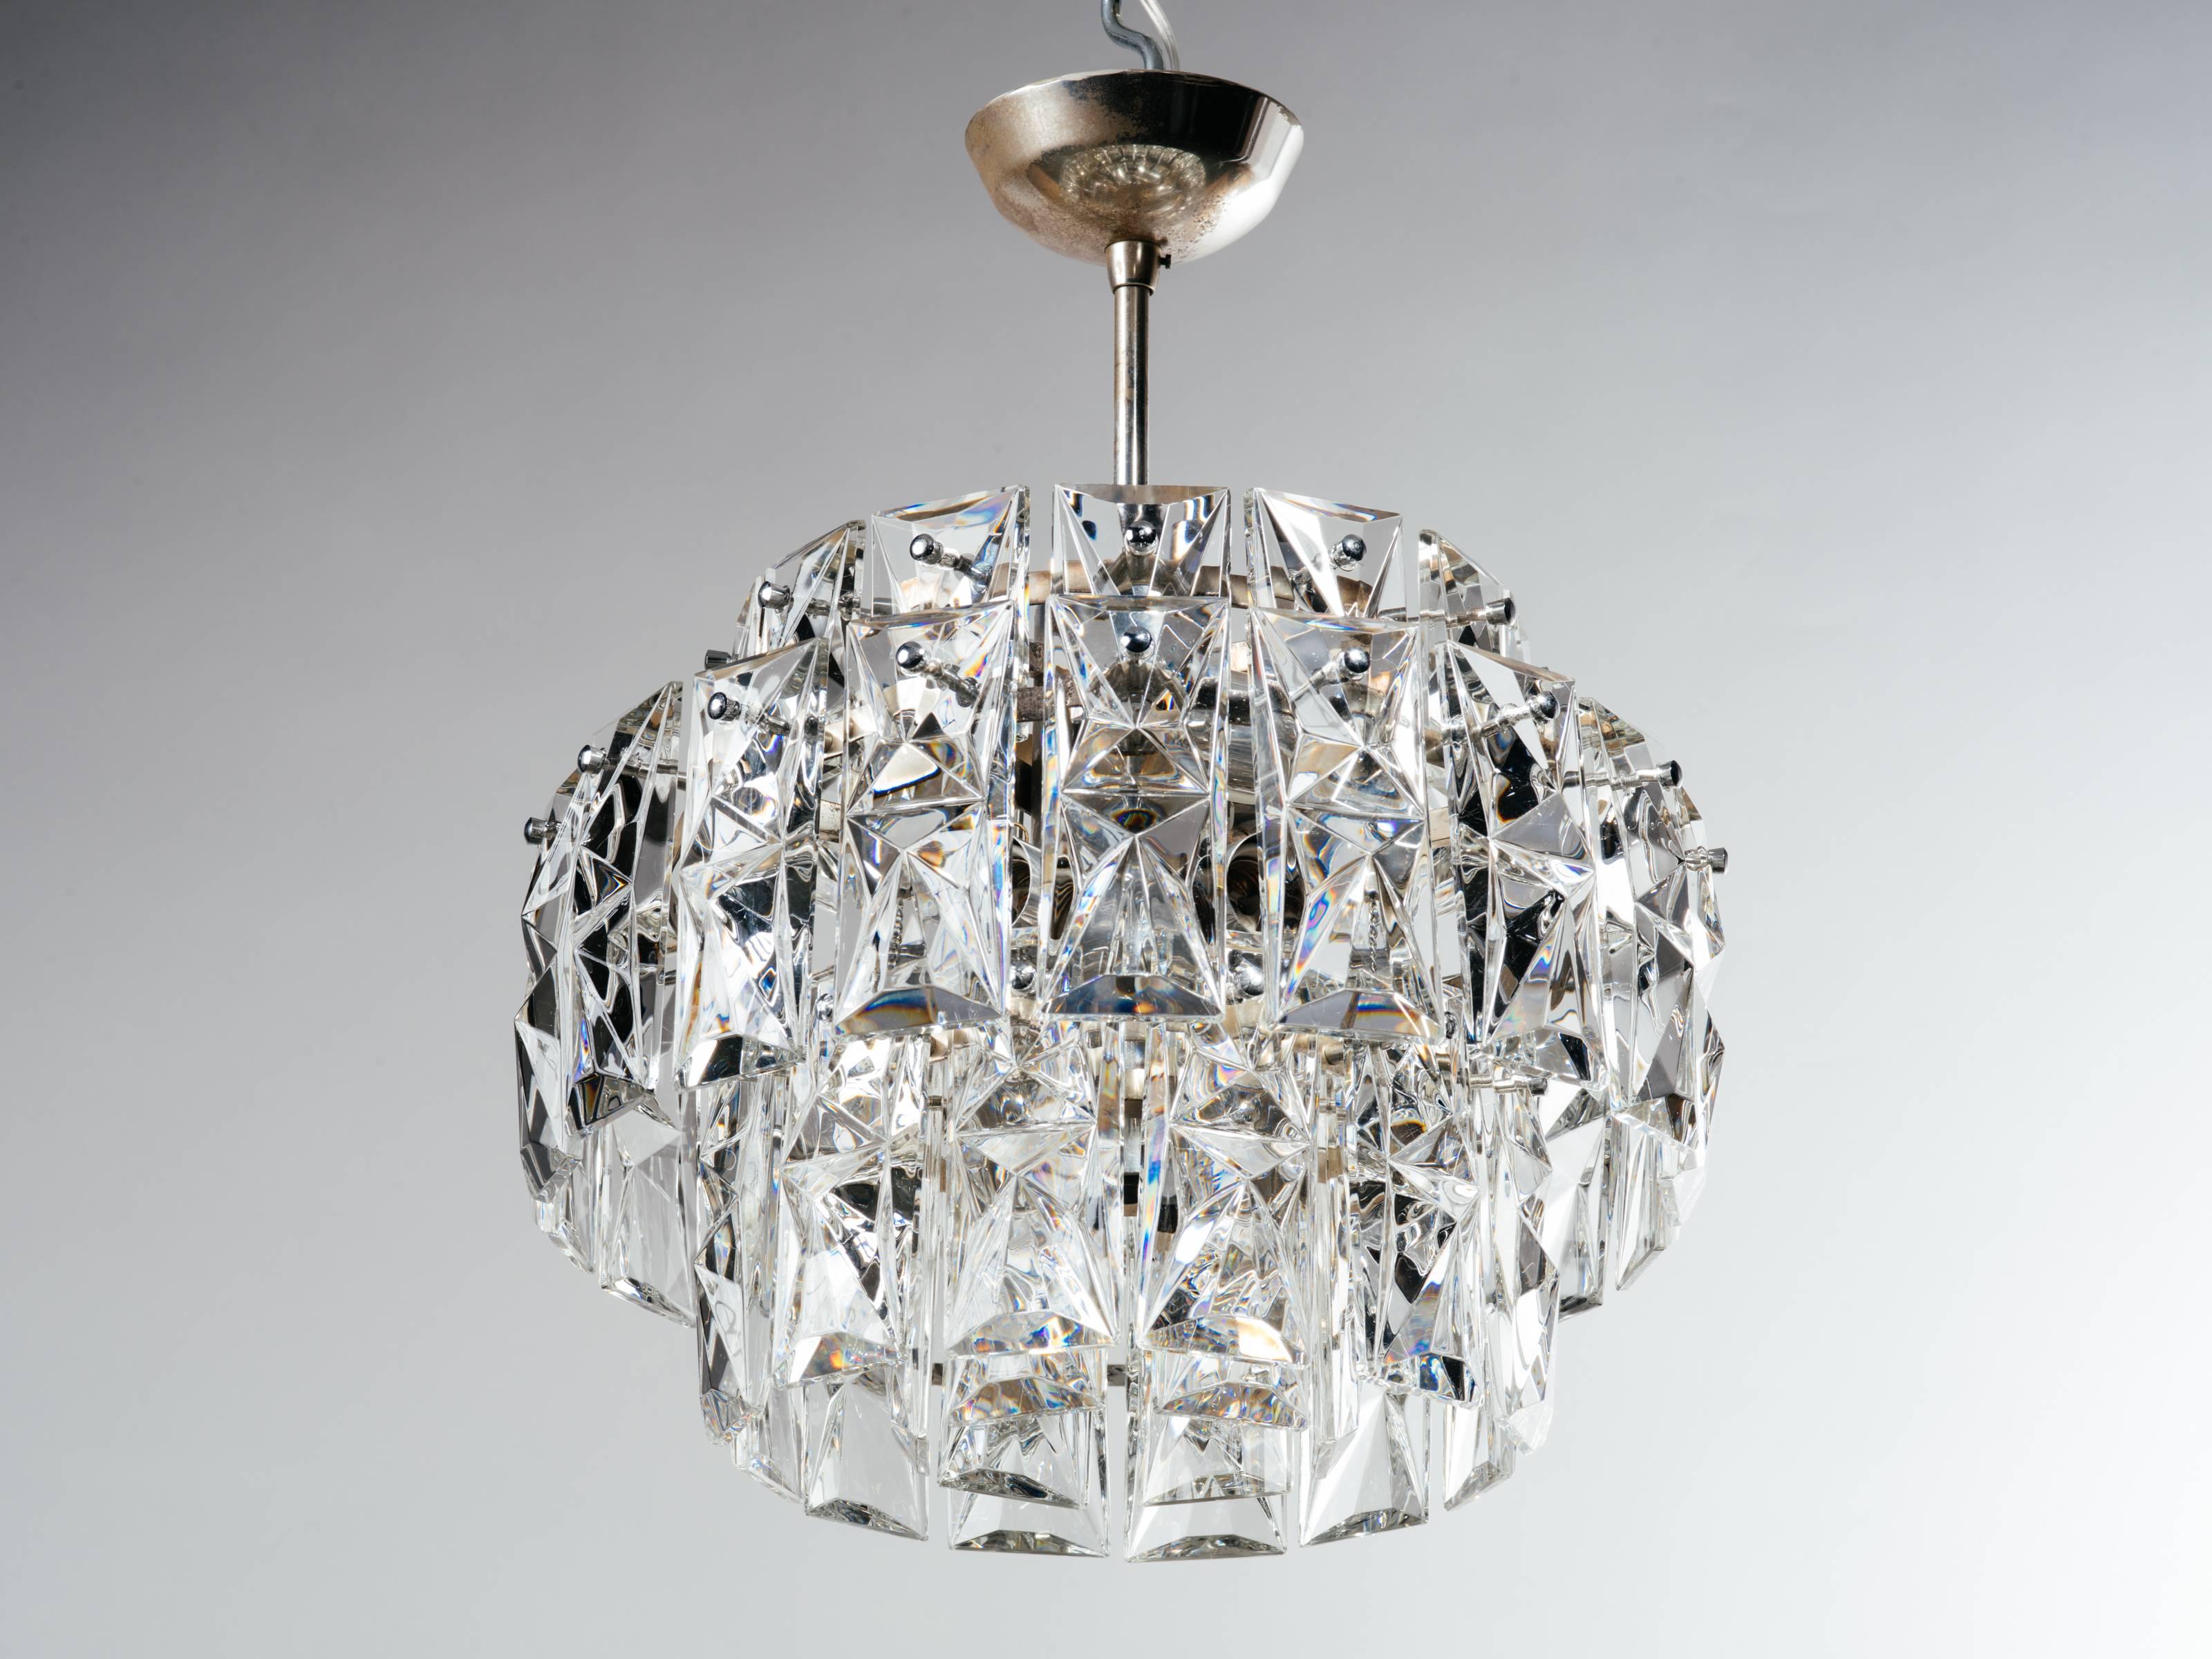 Mid-Century Modern chandelier by German manufacture Kinkeldey, known for their iconic faceted and cut crystal designs. This light fixture features a multiple tier design with single and double length faceted crystal prisms. Chrome frame and stud